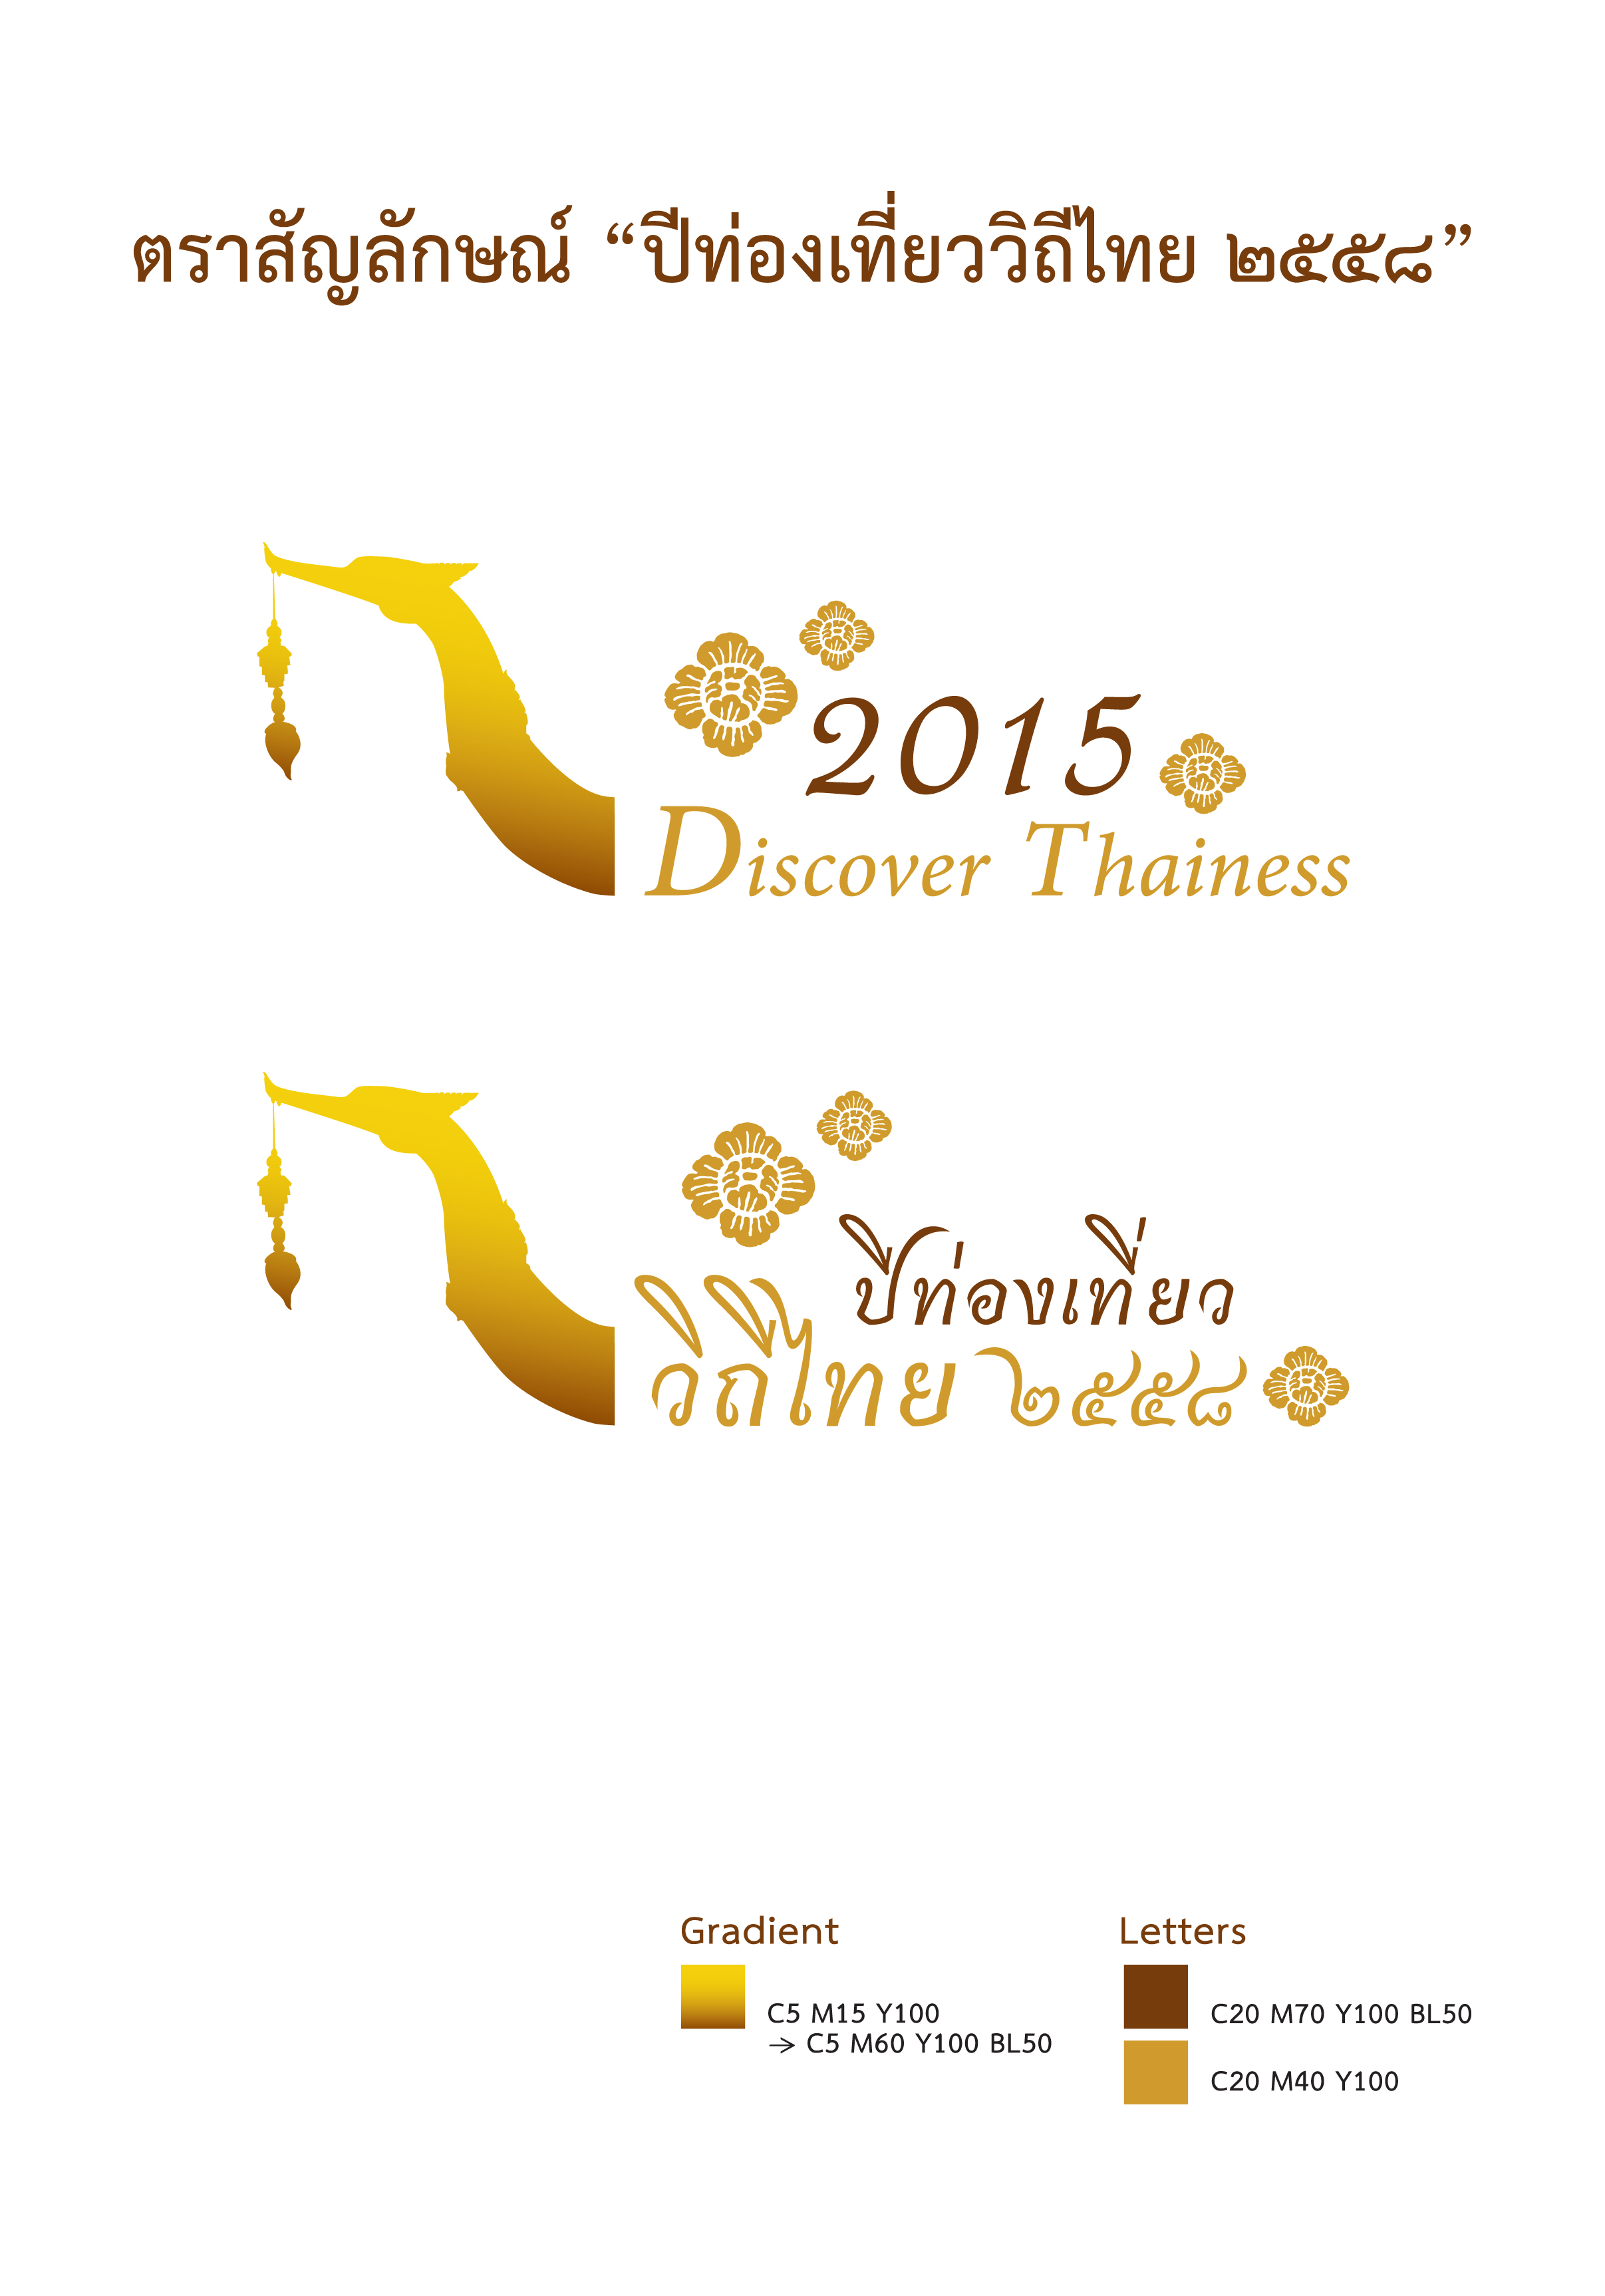 Discover Thainess LOGO.jpg - 1.26 MB